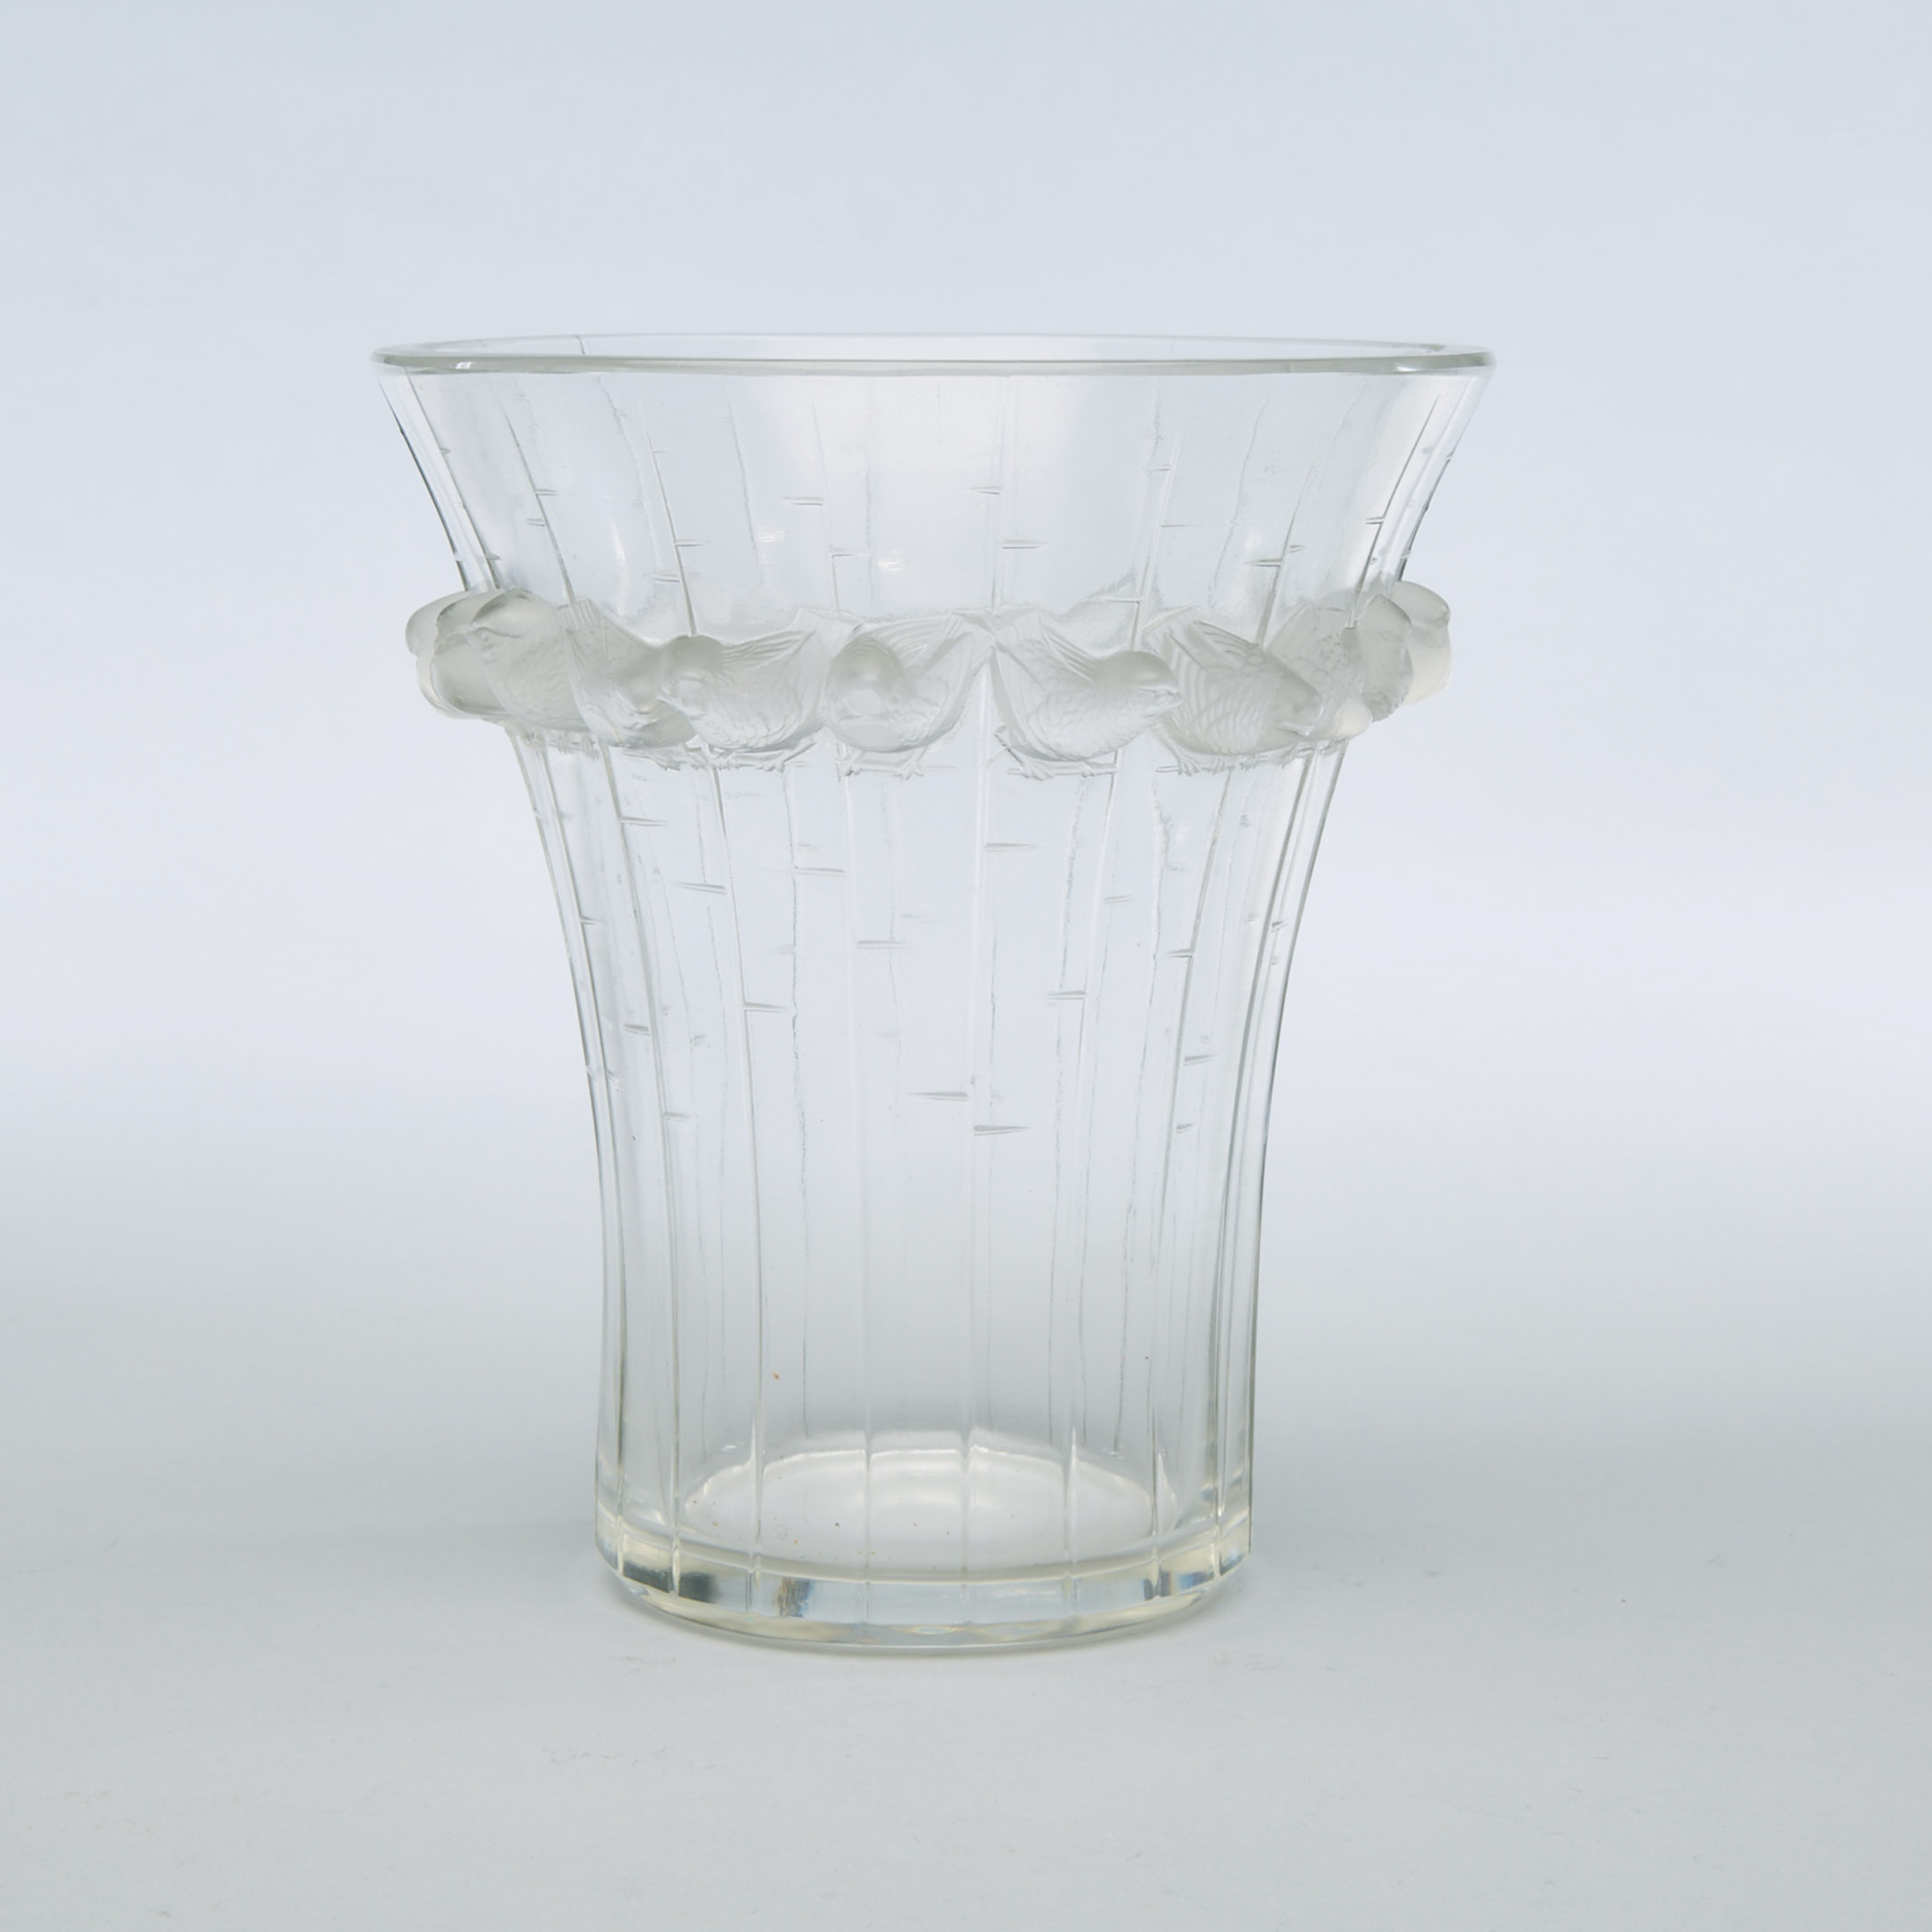 ‘Boulouris’, Lalique Moulded and Partly Frosted Glass Vase, post-1945